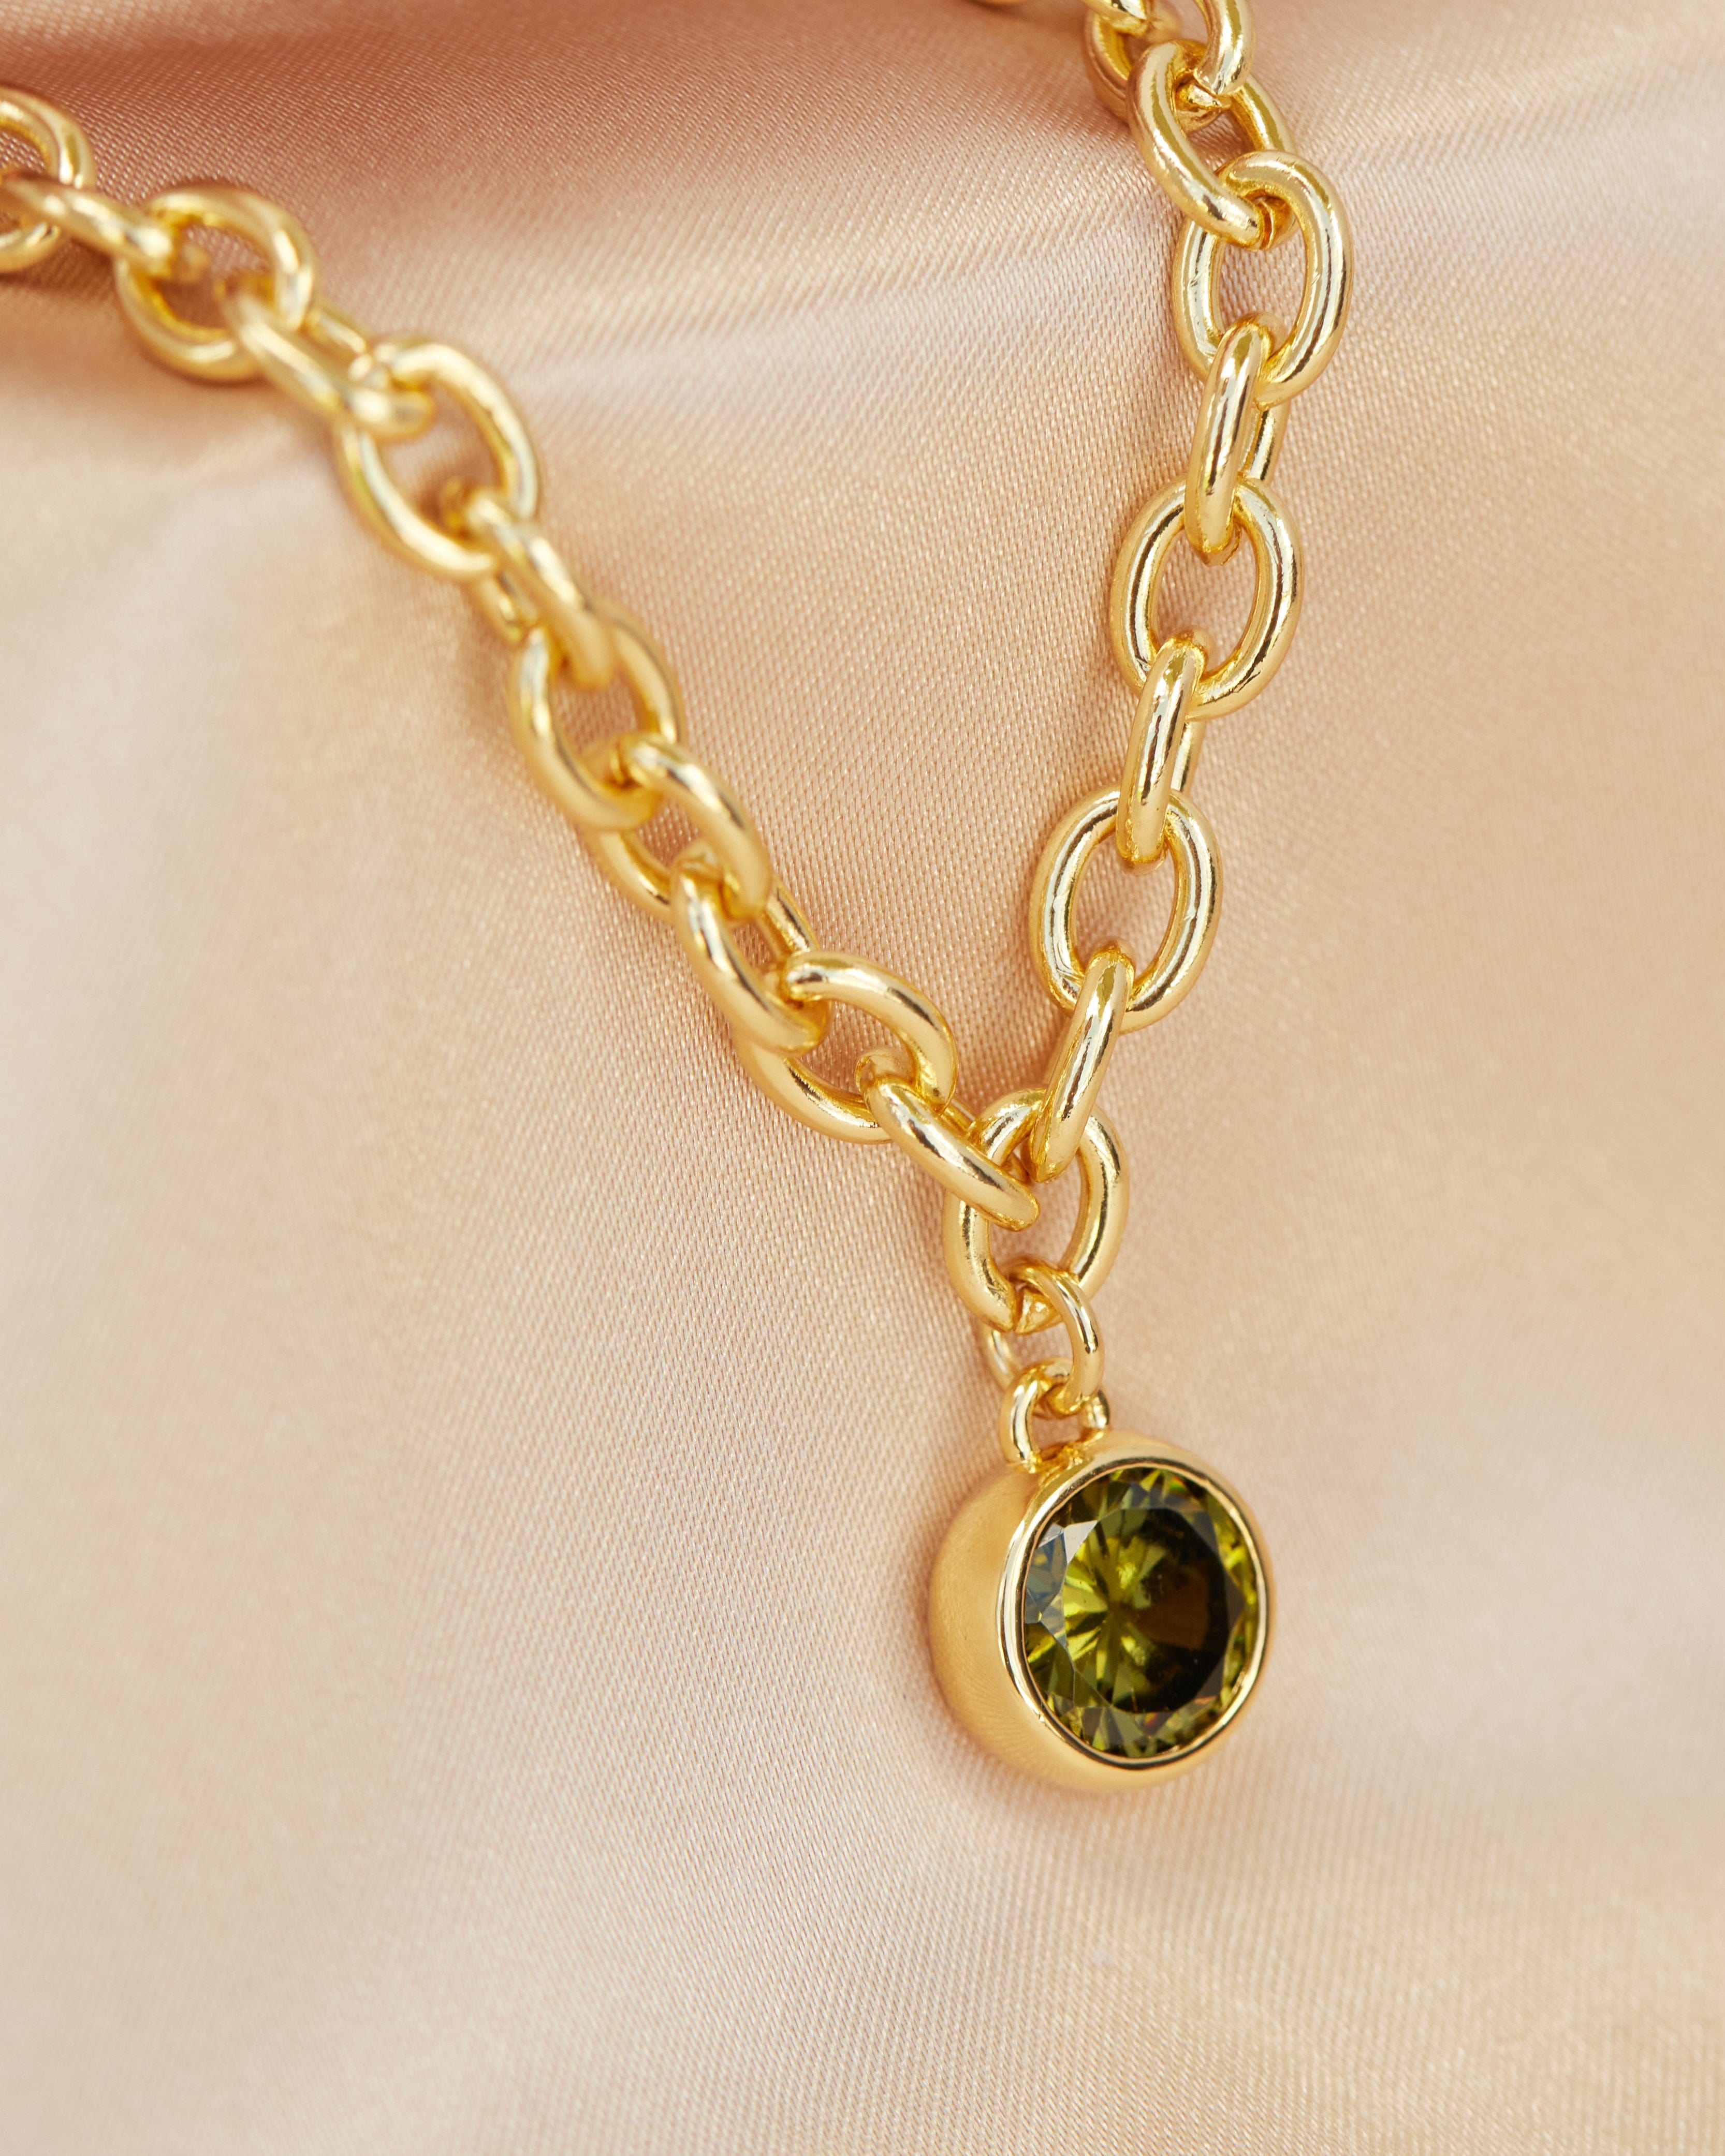 Gold necklace with green jewel charm